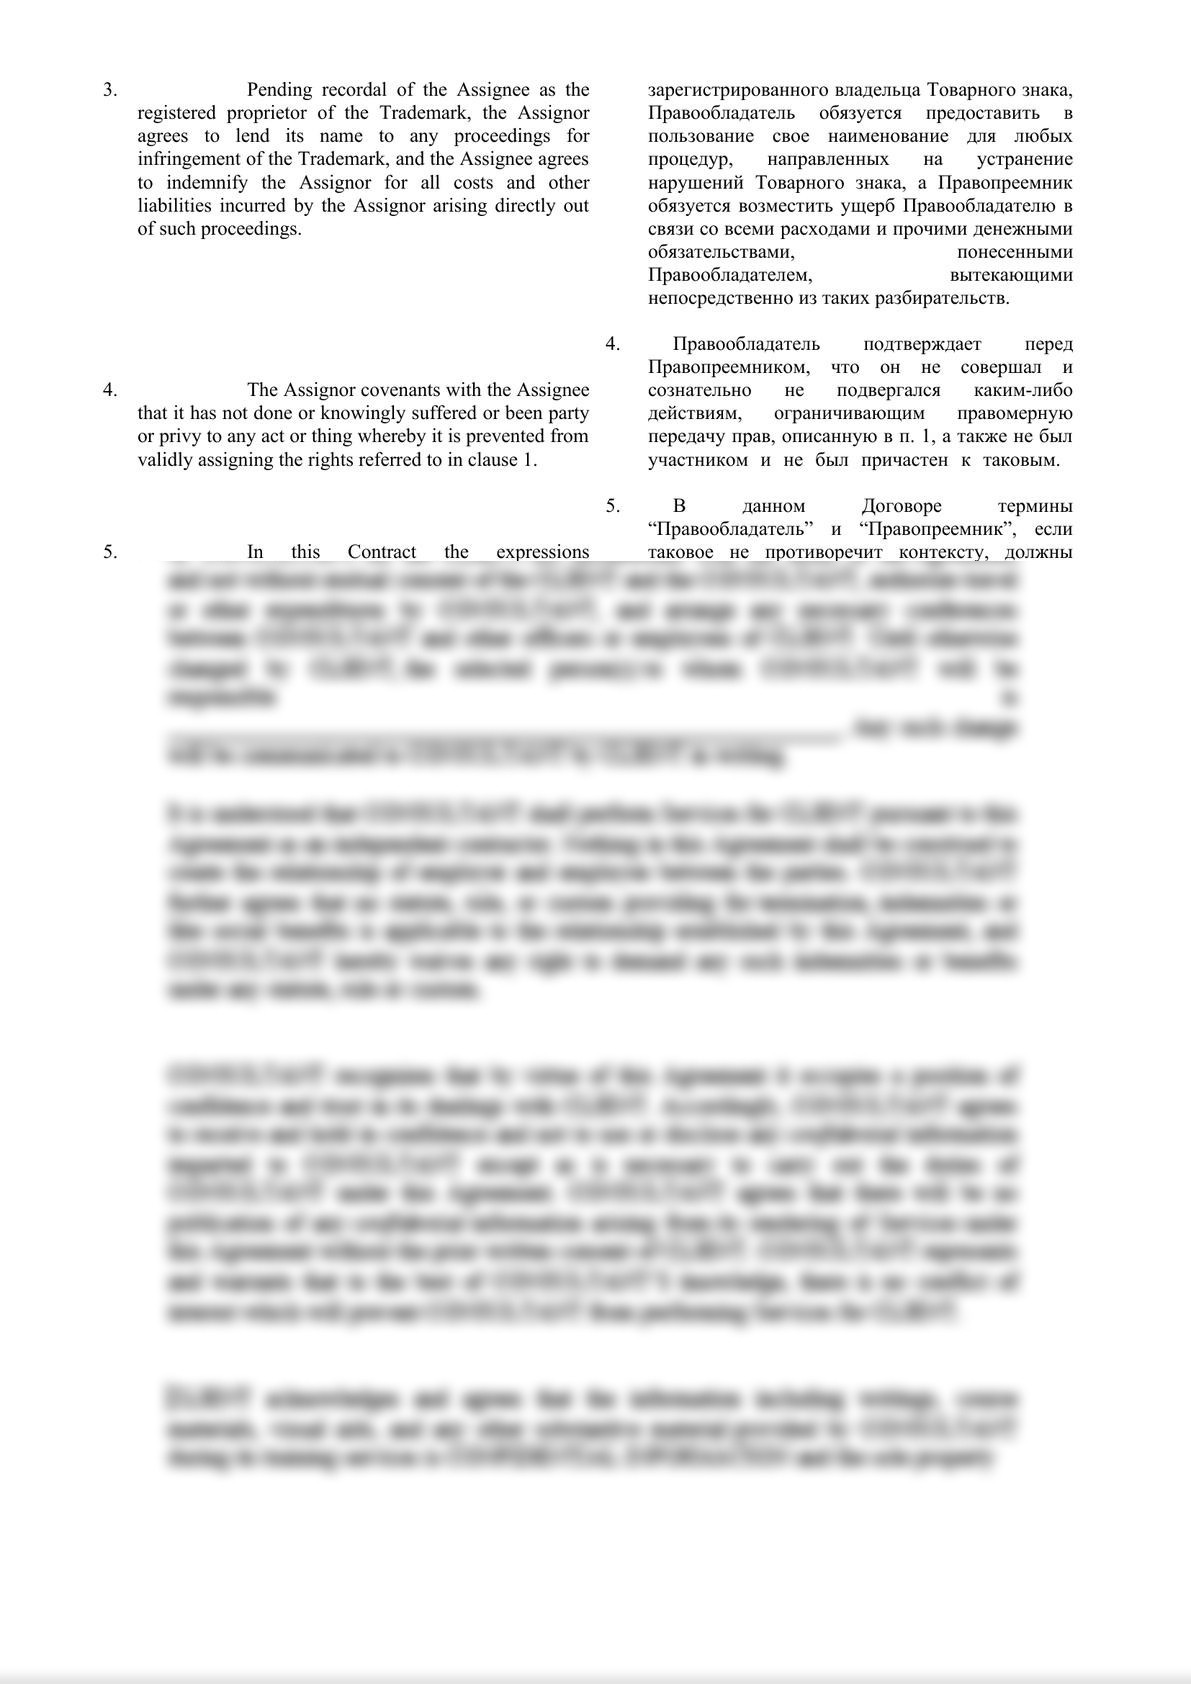 Russian Contract of assignment of exclusive right for the trademark-1